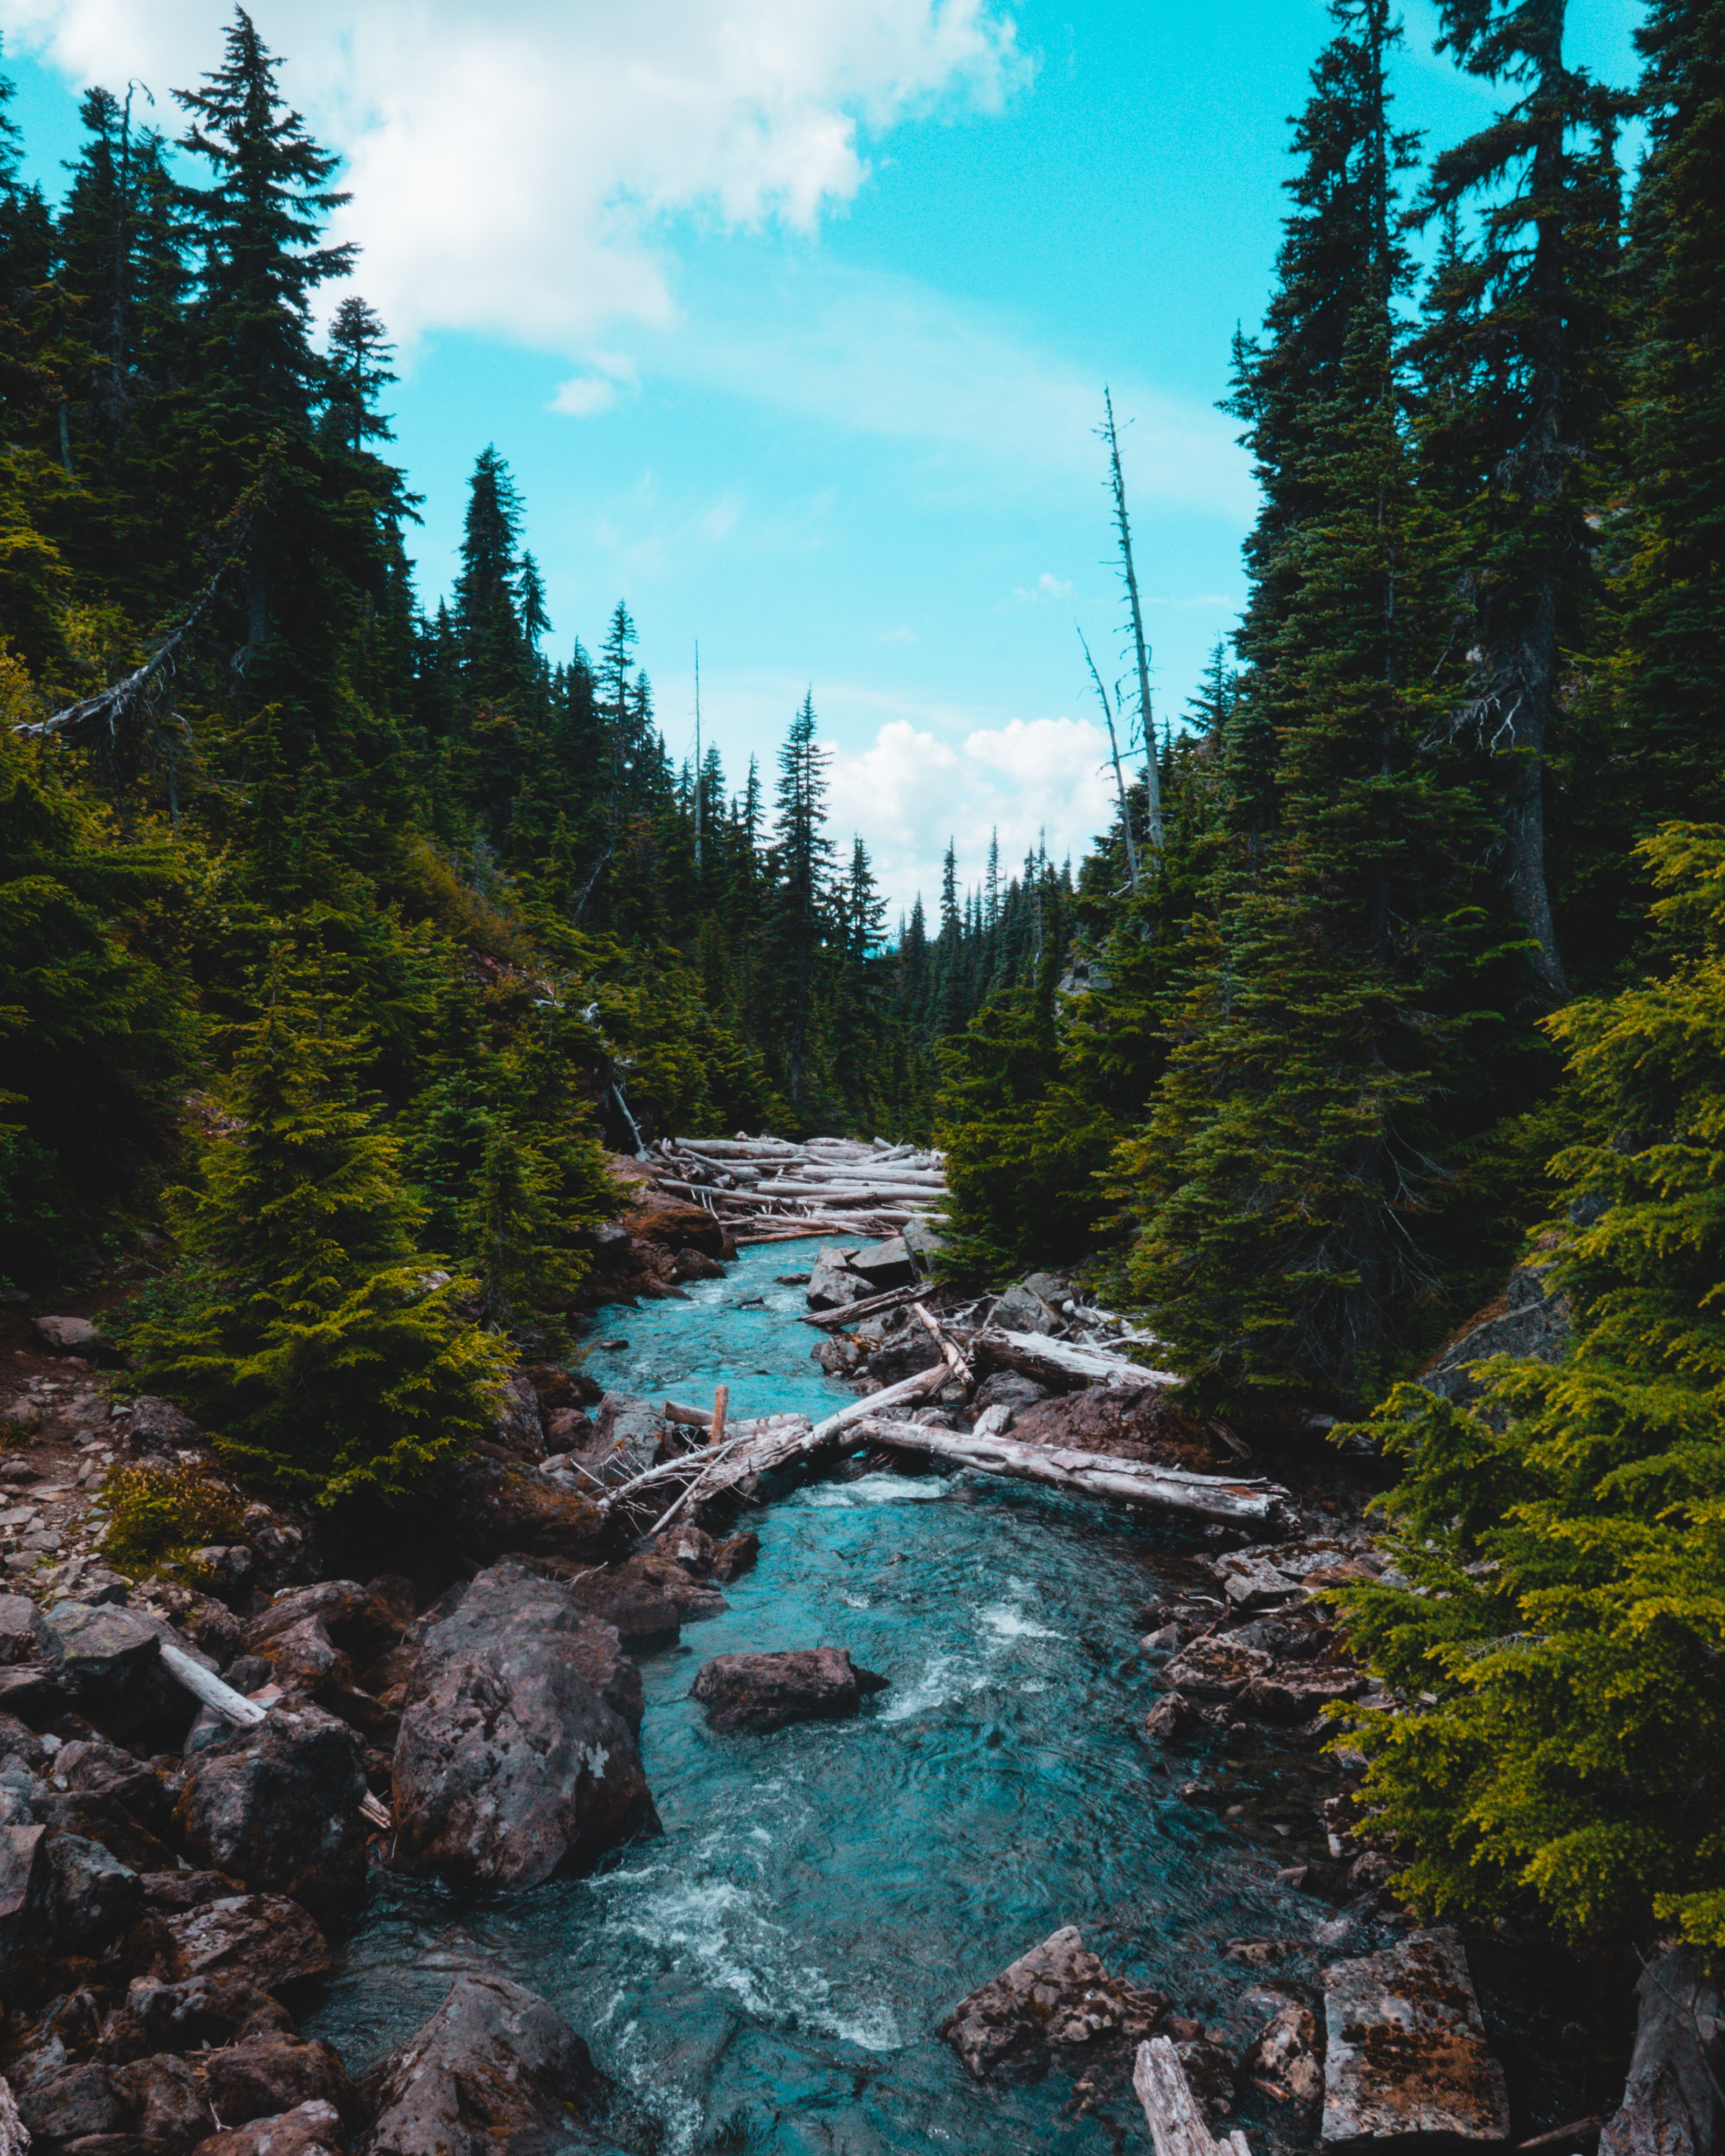 stones, forest, nature, rivers, flow, spruce, fir, stream phone background